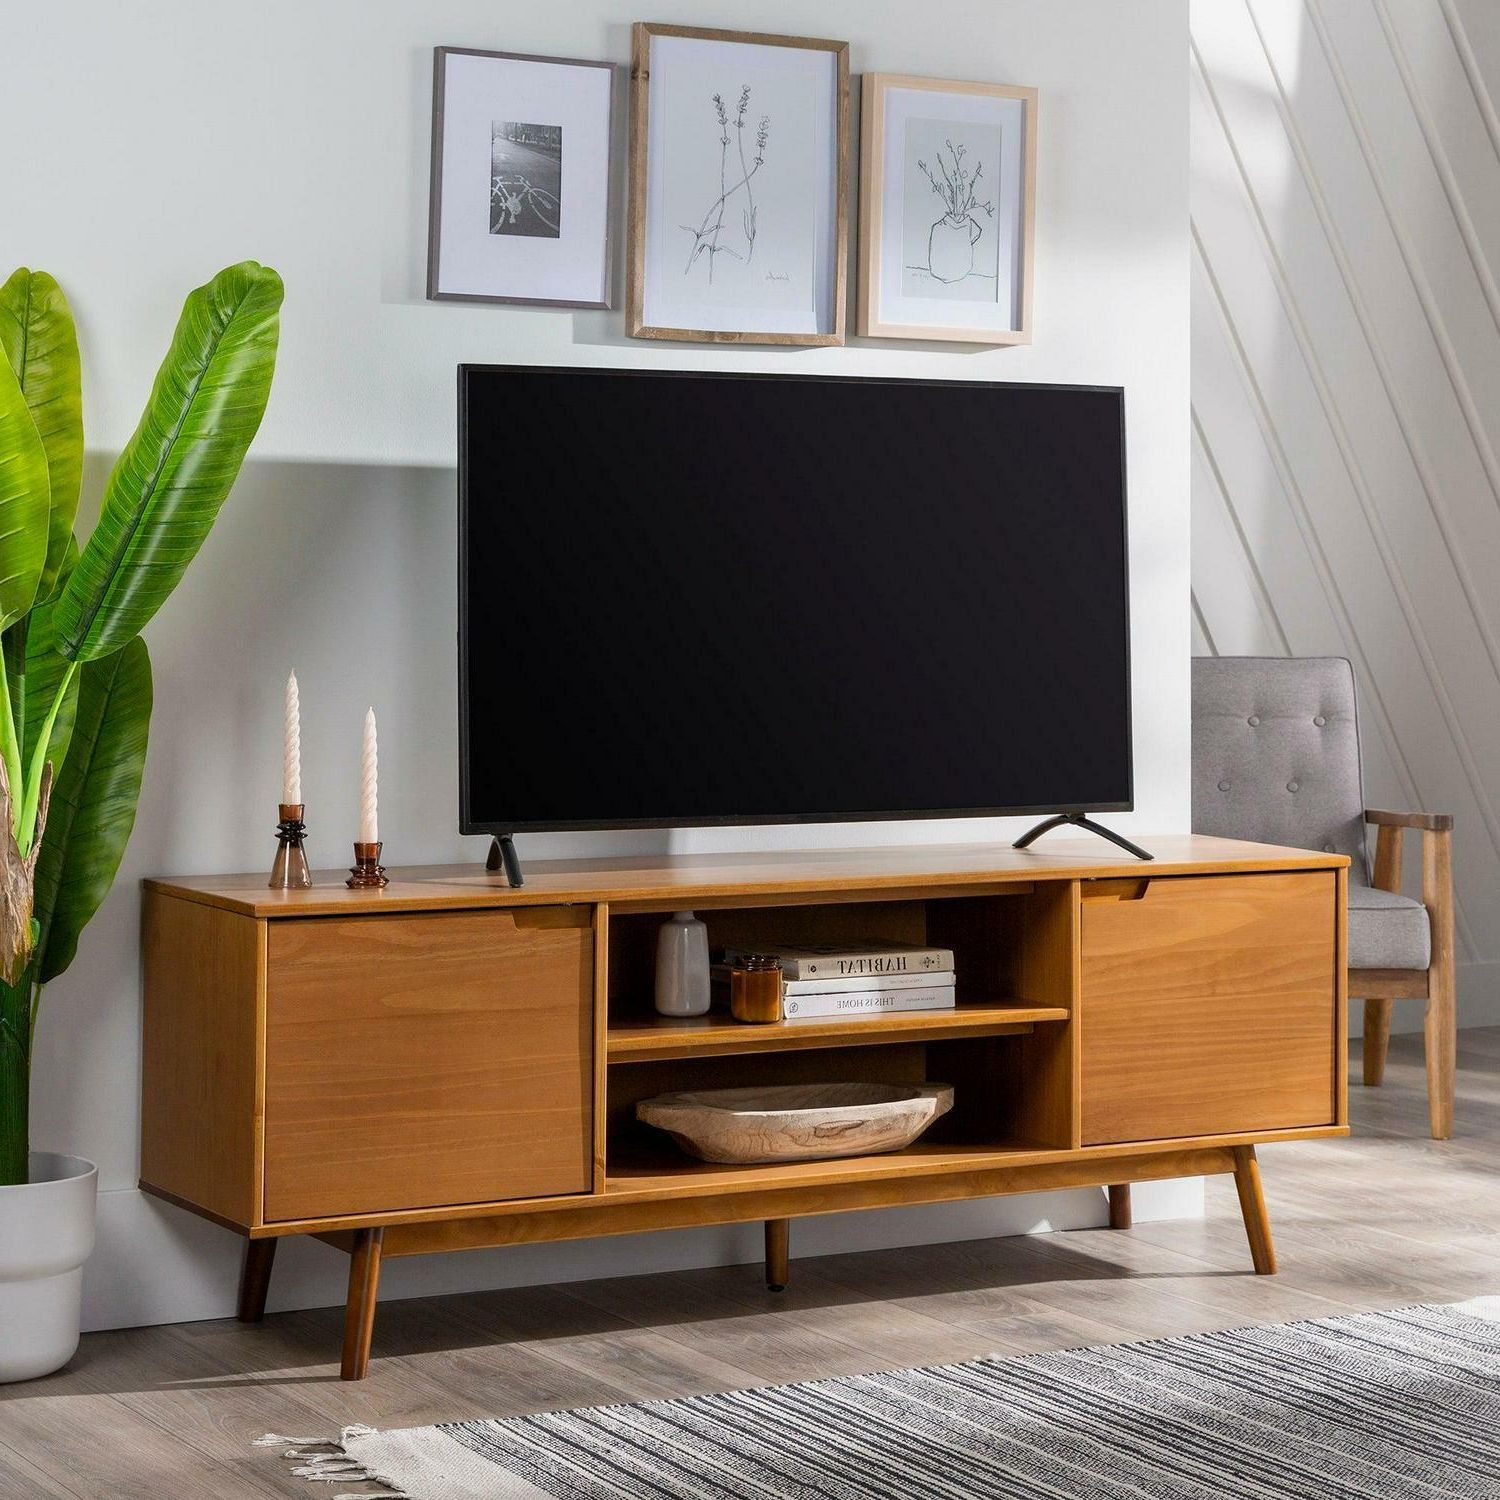 Ebay Throughout Fashionable Mid Century Tv Stands (View 7 of 10)